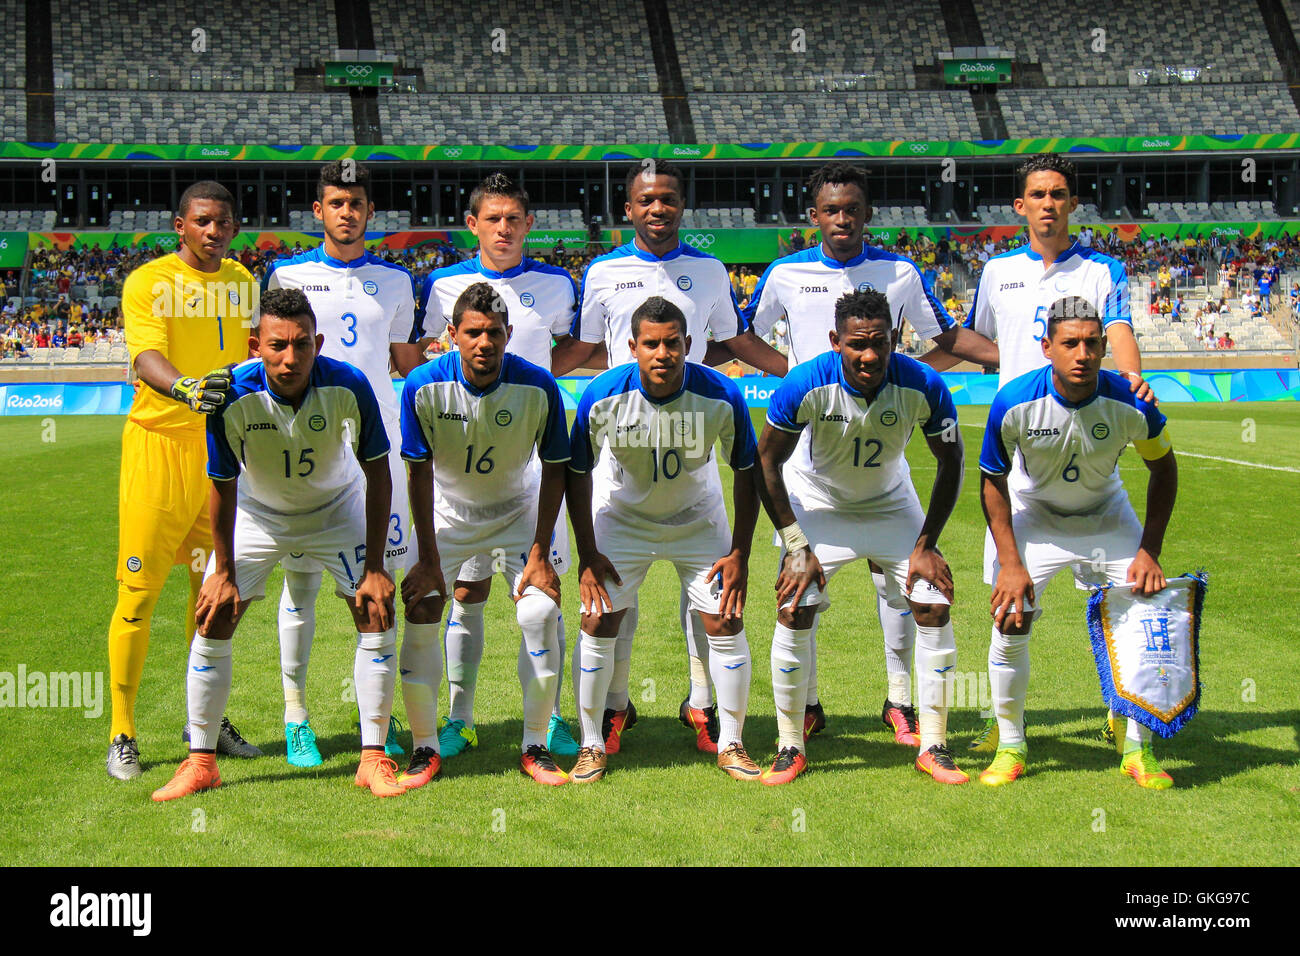 Belo Horizonte, Brazil. 20th August, 2016. Honduras team poses for photo during the match between Honduras (HON) x Nigeria (NGR), the bronze medal contest of the Olympic Men&#39;s Football, the Rio Olympics 2016 held at the Mineirao Stadium in the host city Belo Horte, MG. (Photo: Dudu Macedo/edo/Fotoarena) Credit:  Foto Arena LTDA/Alamy Live News Stock Photo